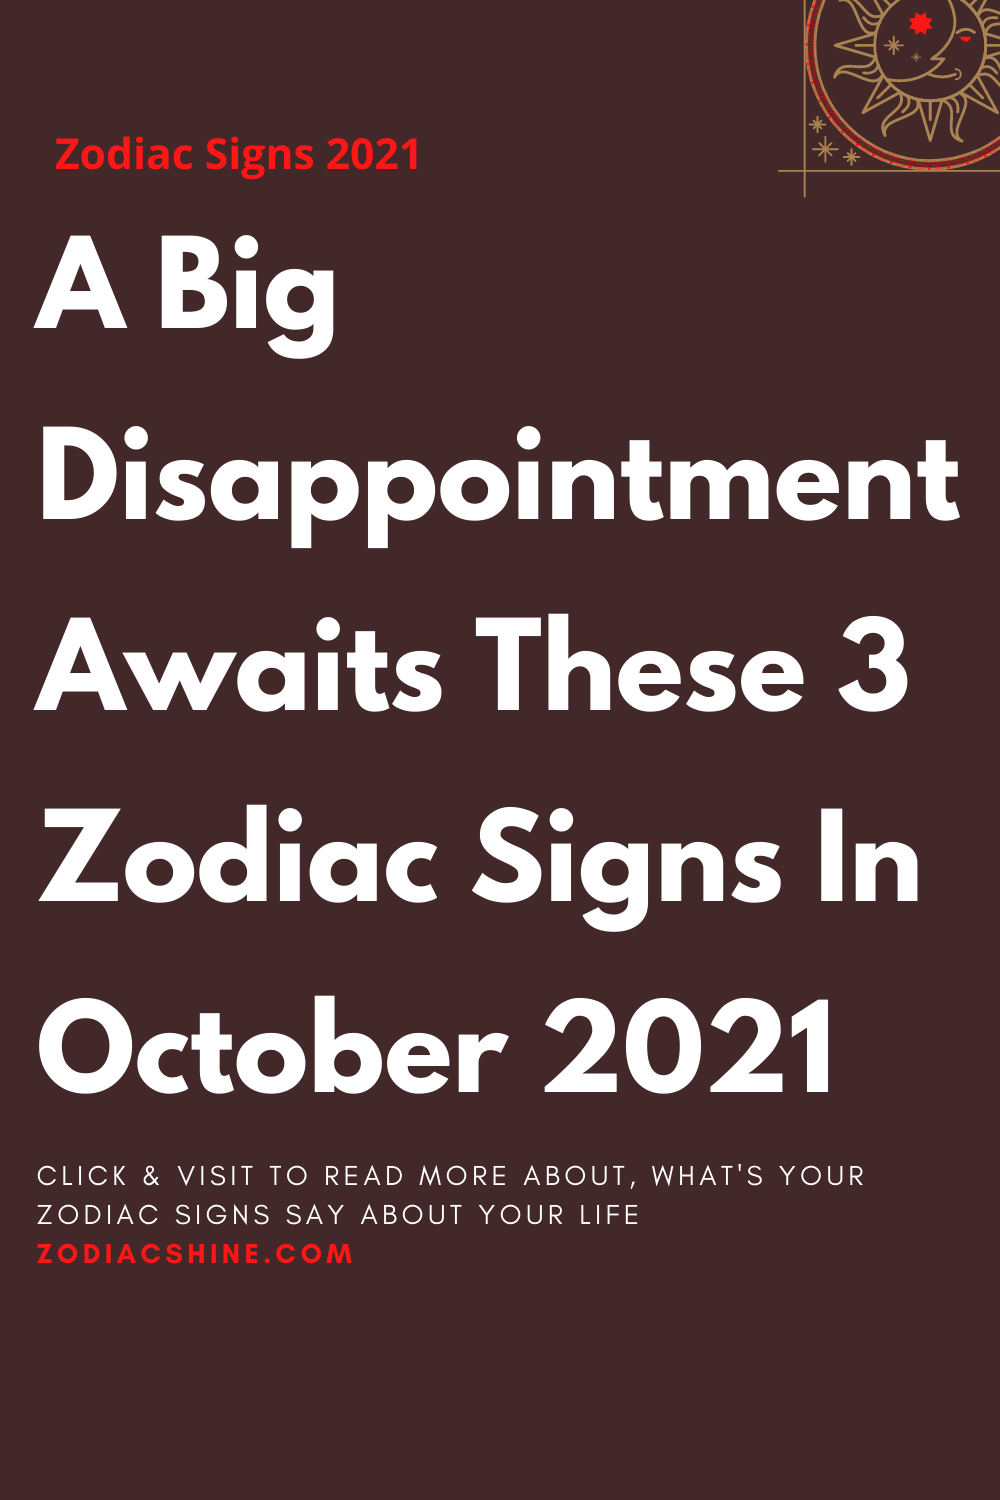 A Big Disappointment Awaits These 3 Zodiac Signs In October 2021